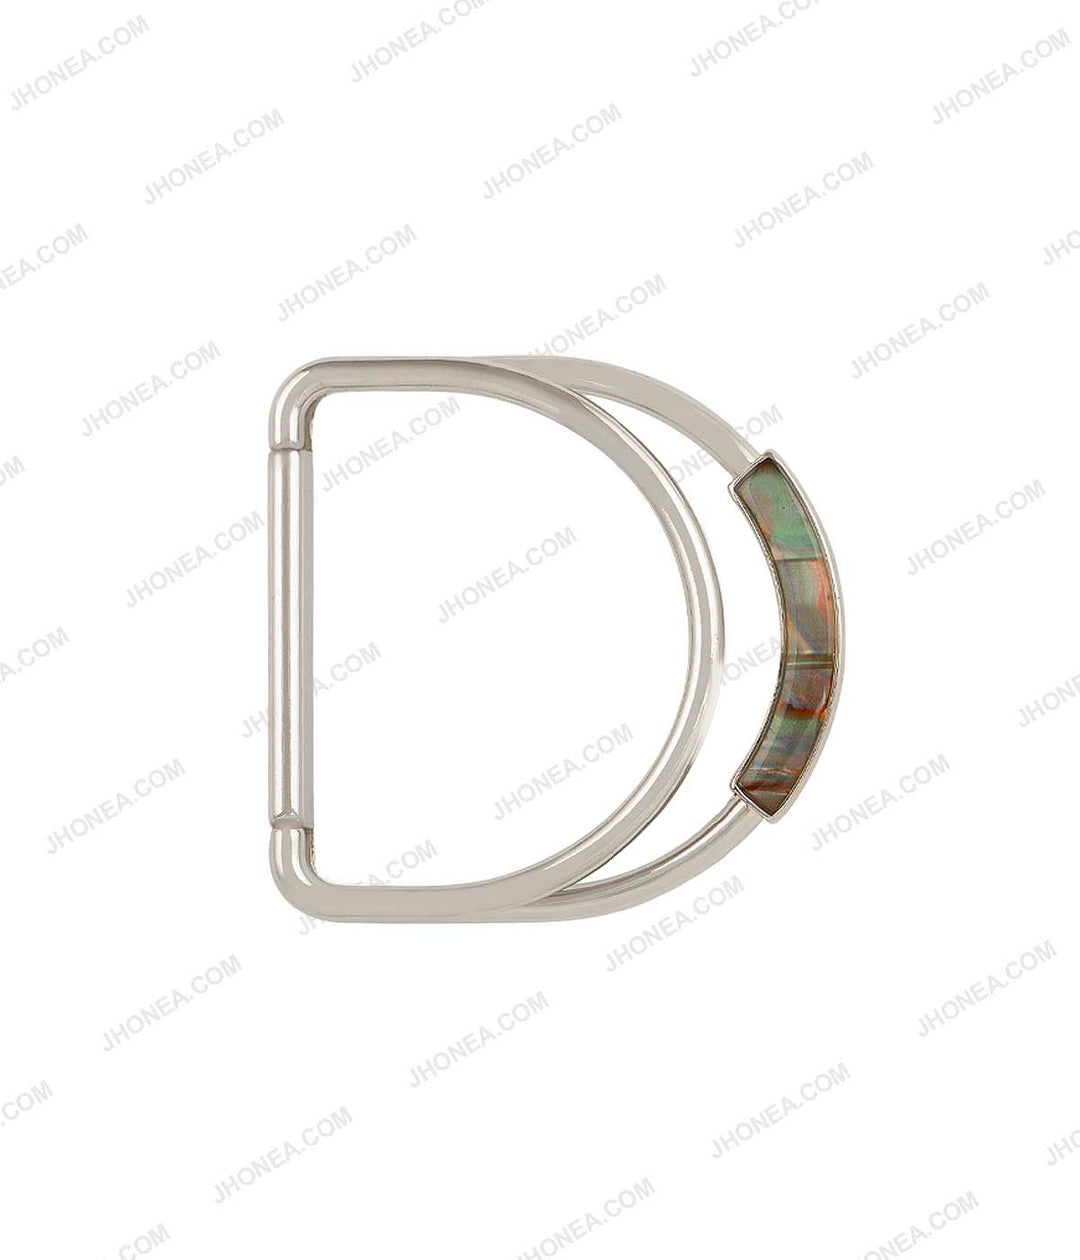 Heavy Duty Foldable Structure Chrome Finish Silver Belt Buckle